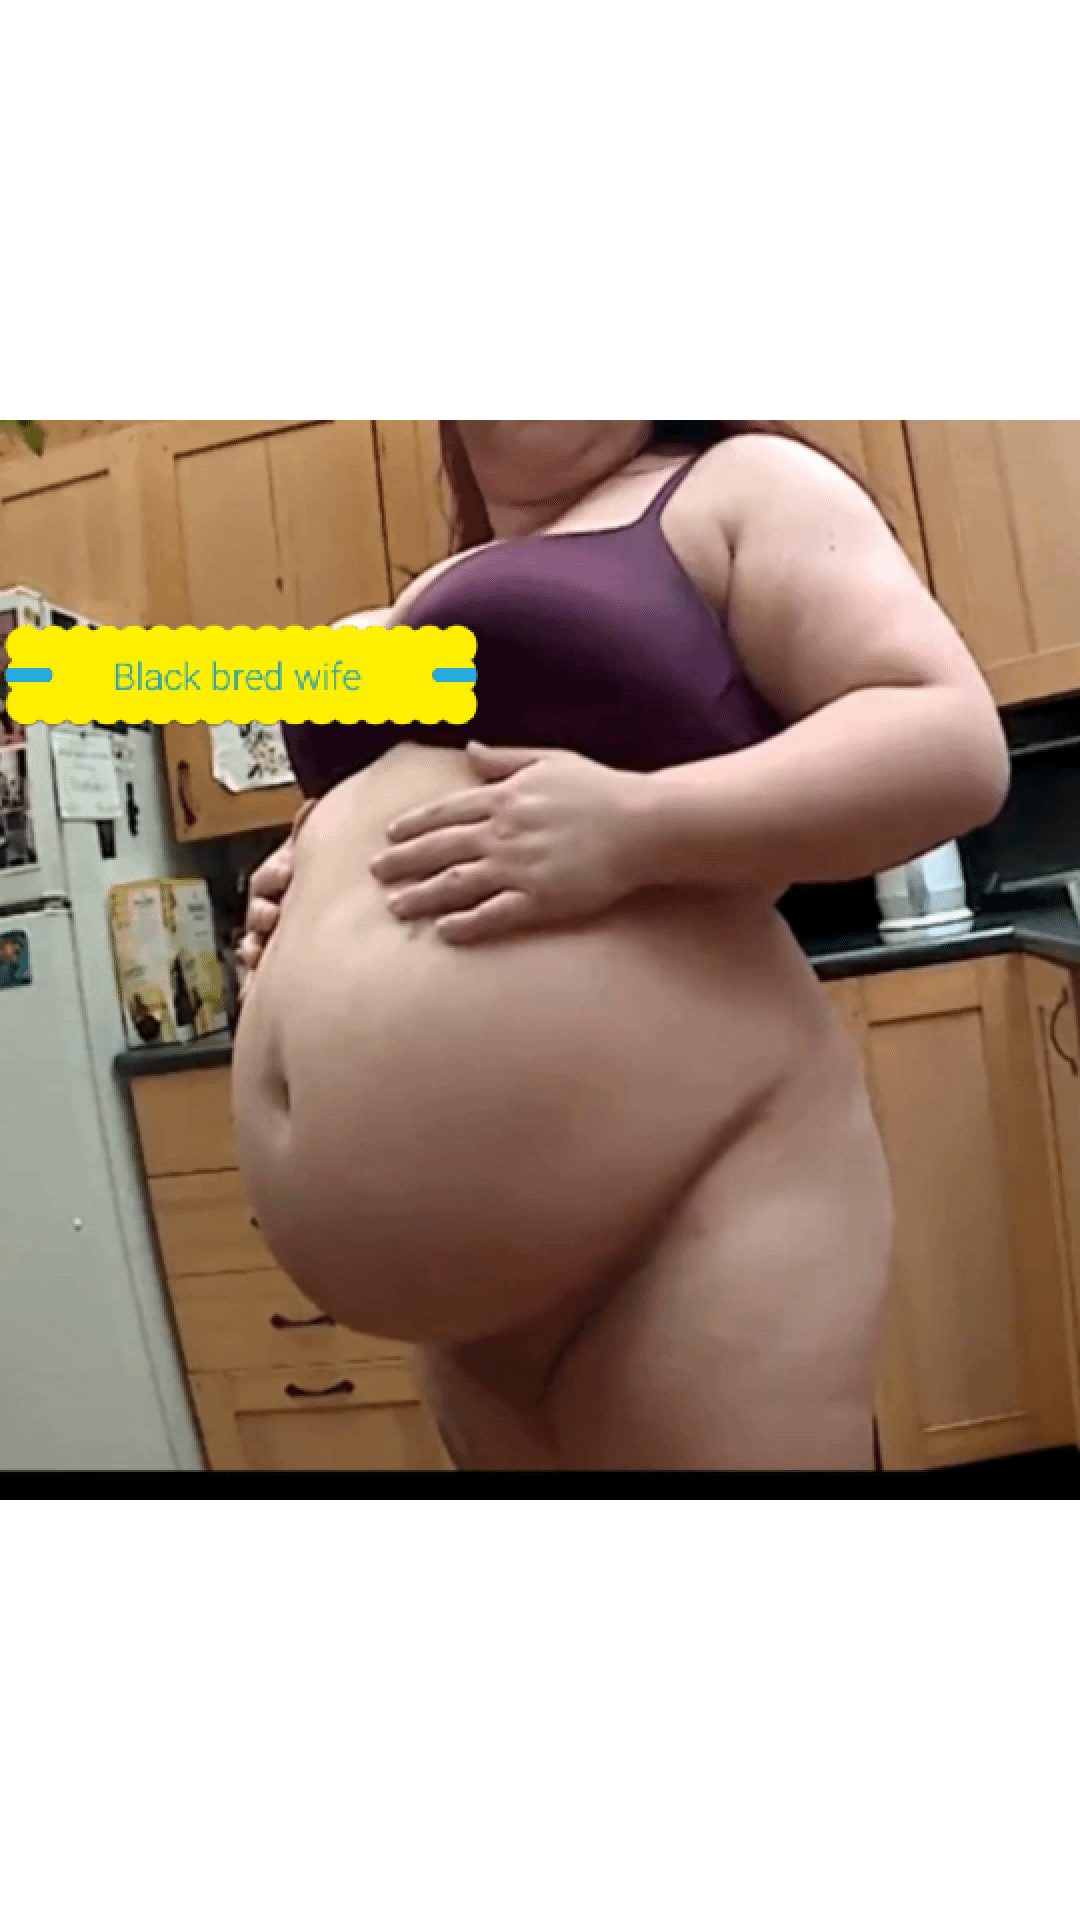 Sex porn. info gif black bred white wife 638536109e971 about Bbw porn gifs. Enjoy watching new porn gifs every day